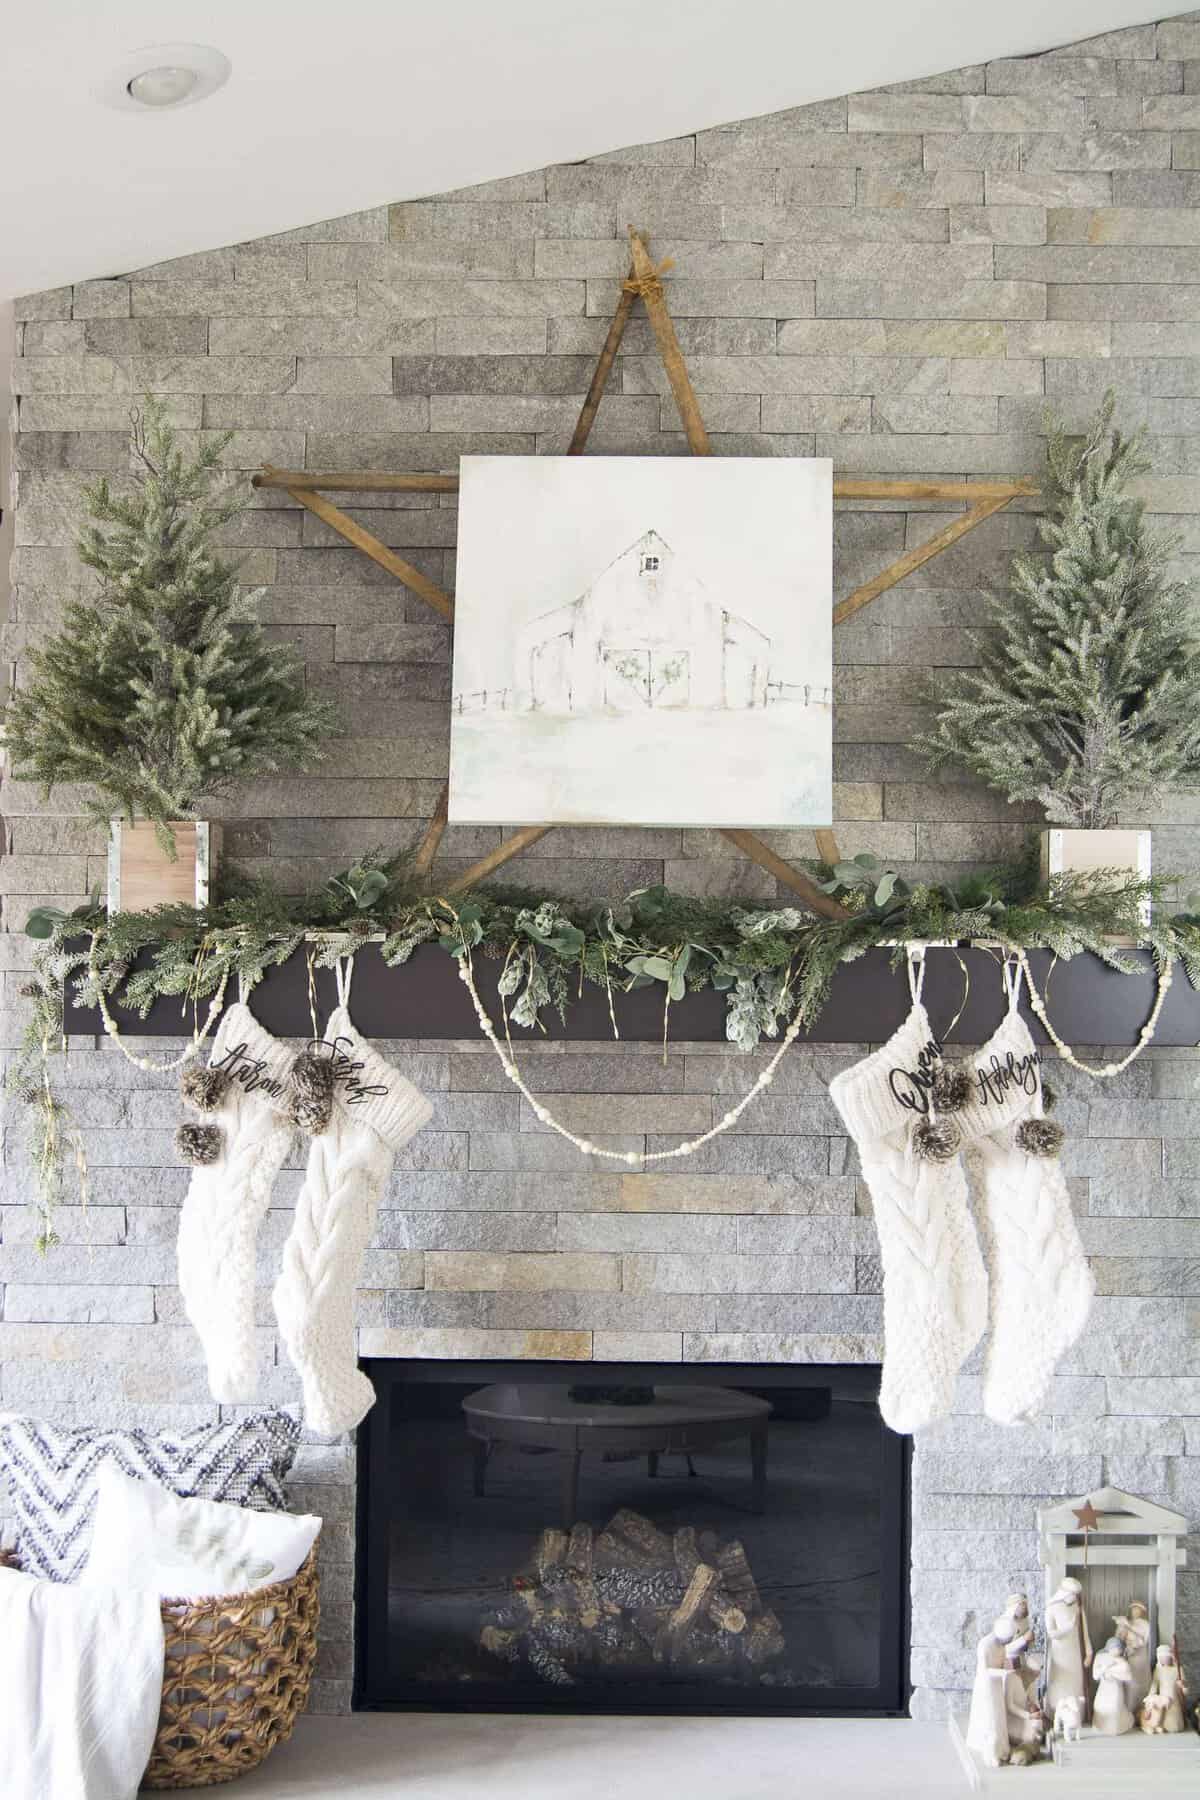 Christmastime should be cozy and filled with joy. Join me for my Cozy Christmas Home Tour along with 9 talented bloggers for Christmas decor inspiration.